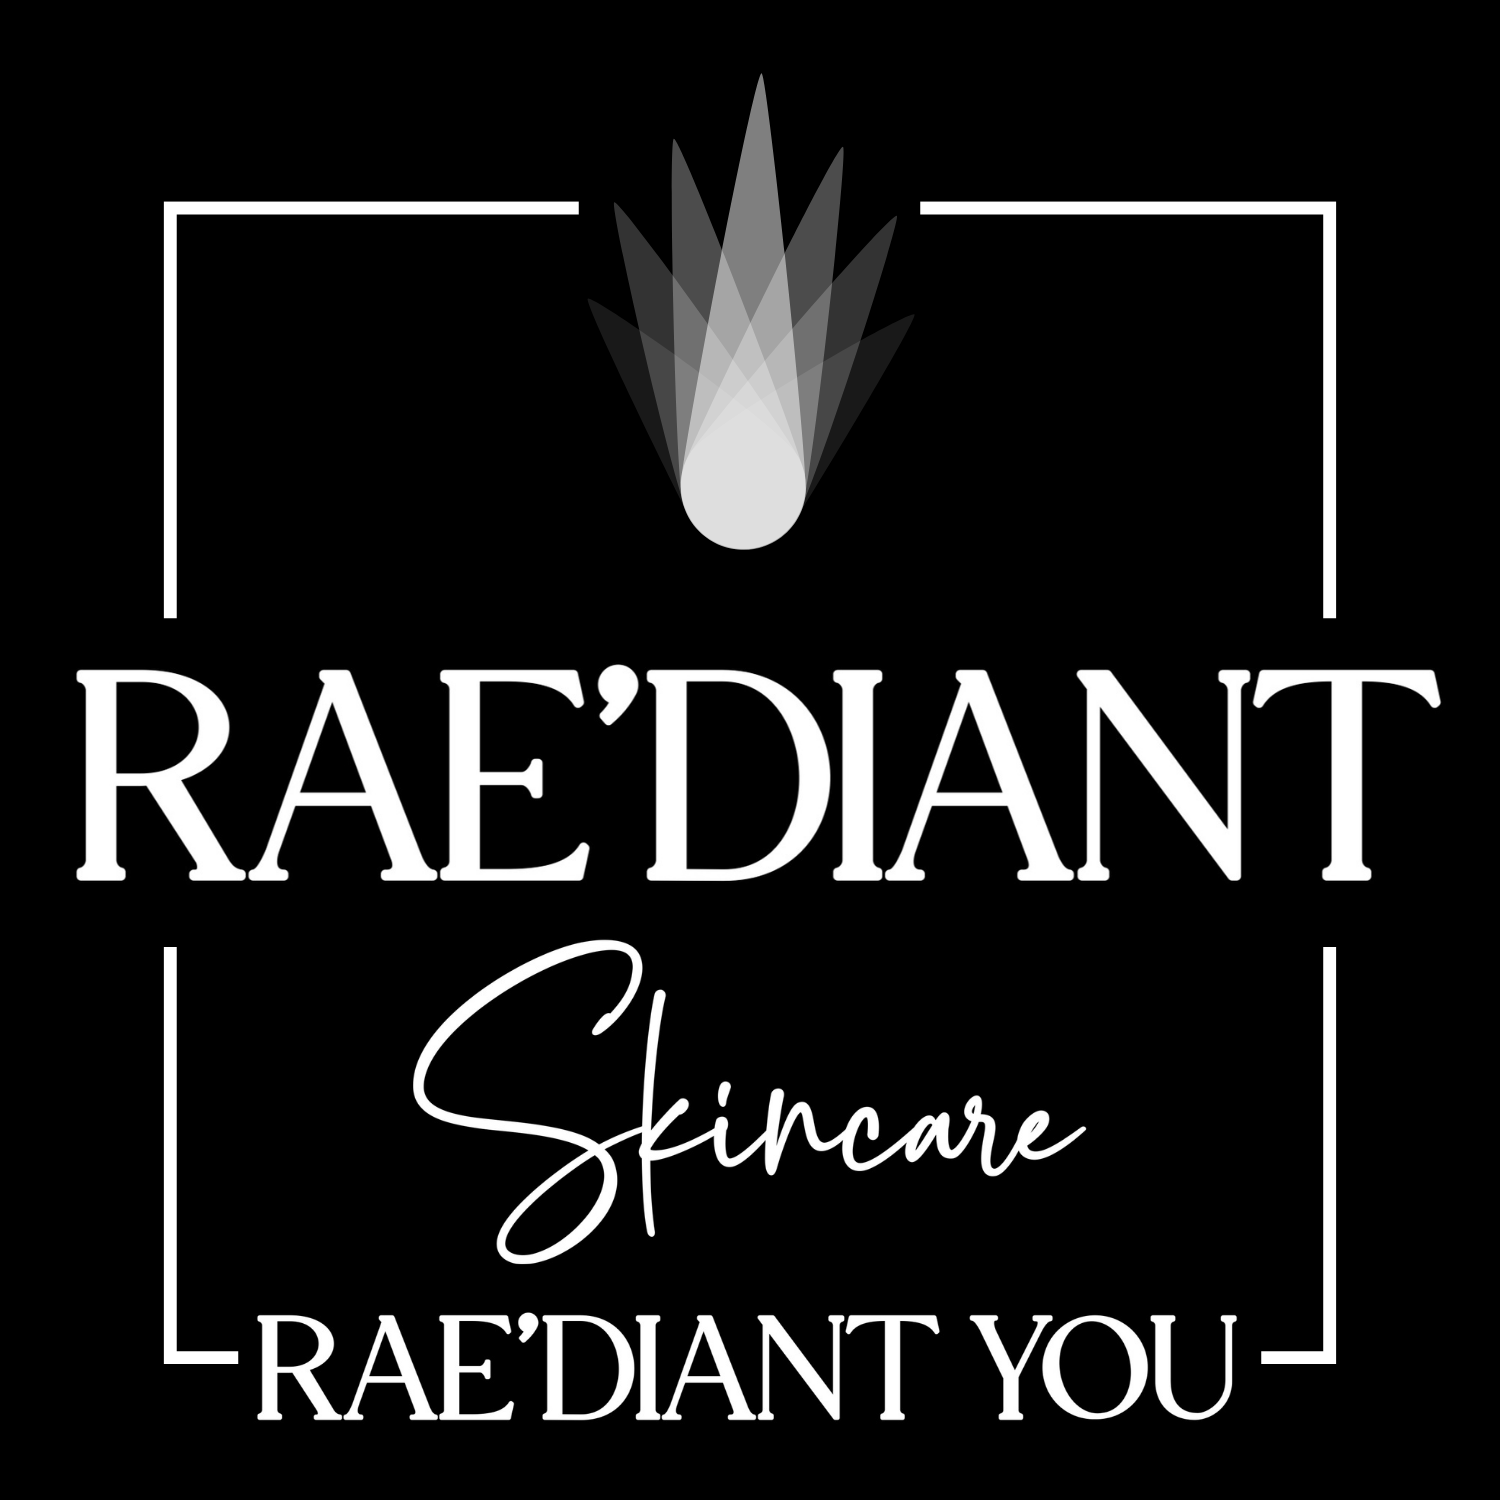 Rae’diant You